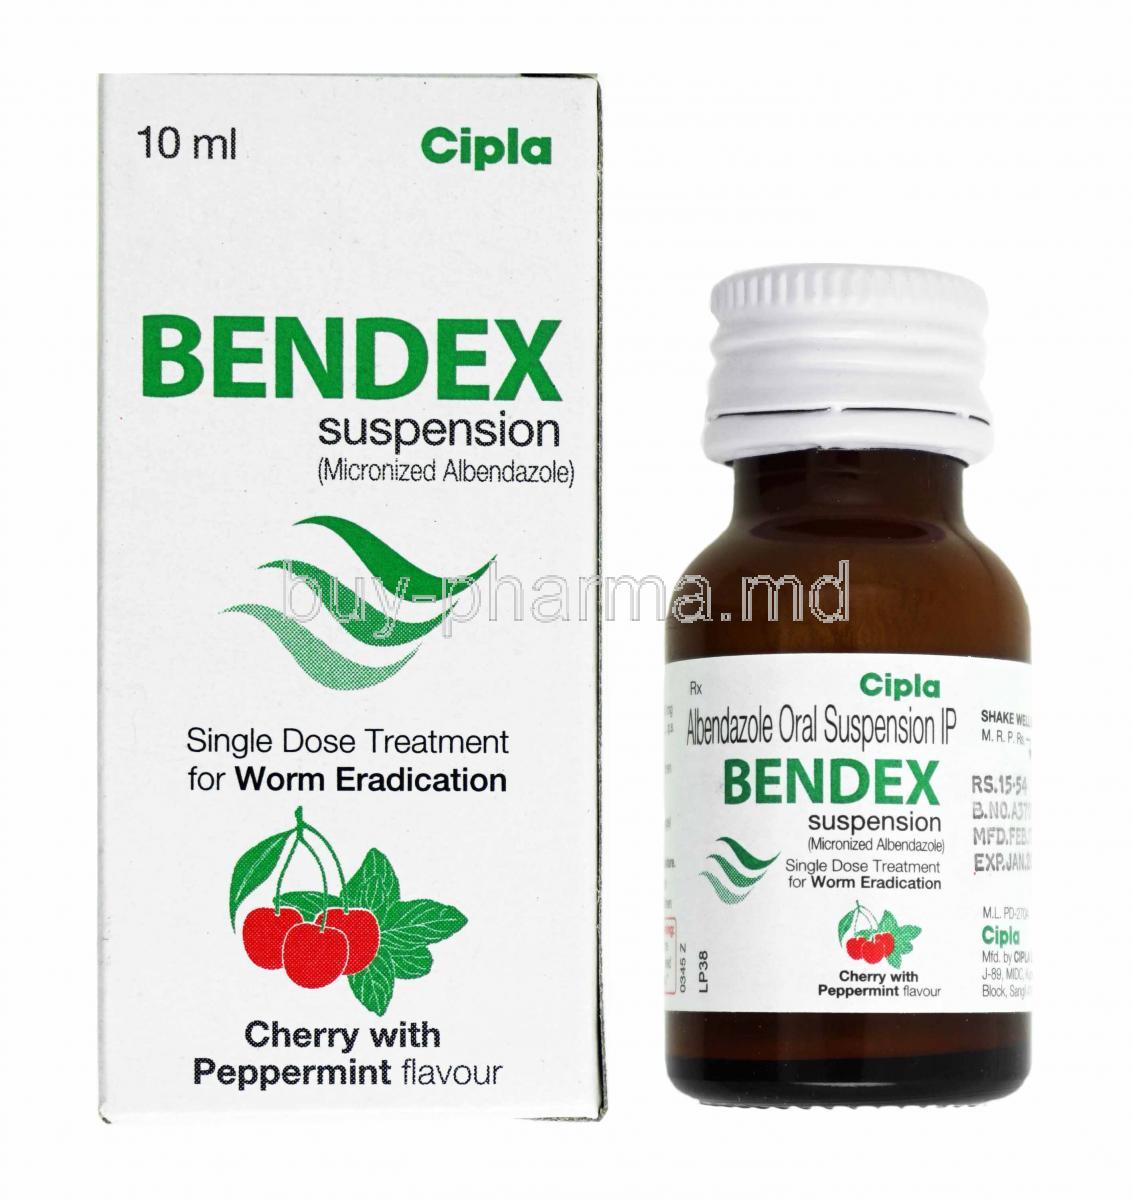 Bendex Suspension Cherry with Peppermint Flavour box and tablets, Albendazole